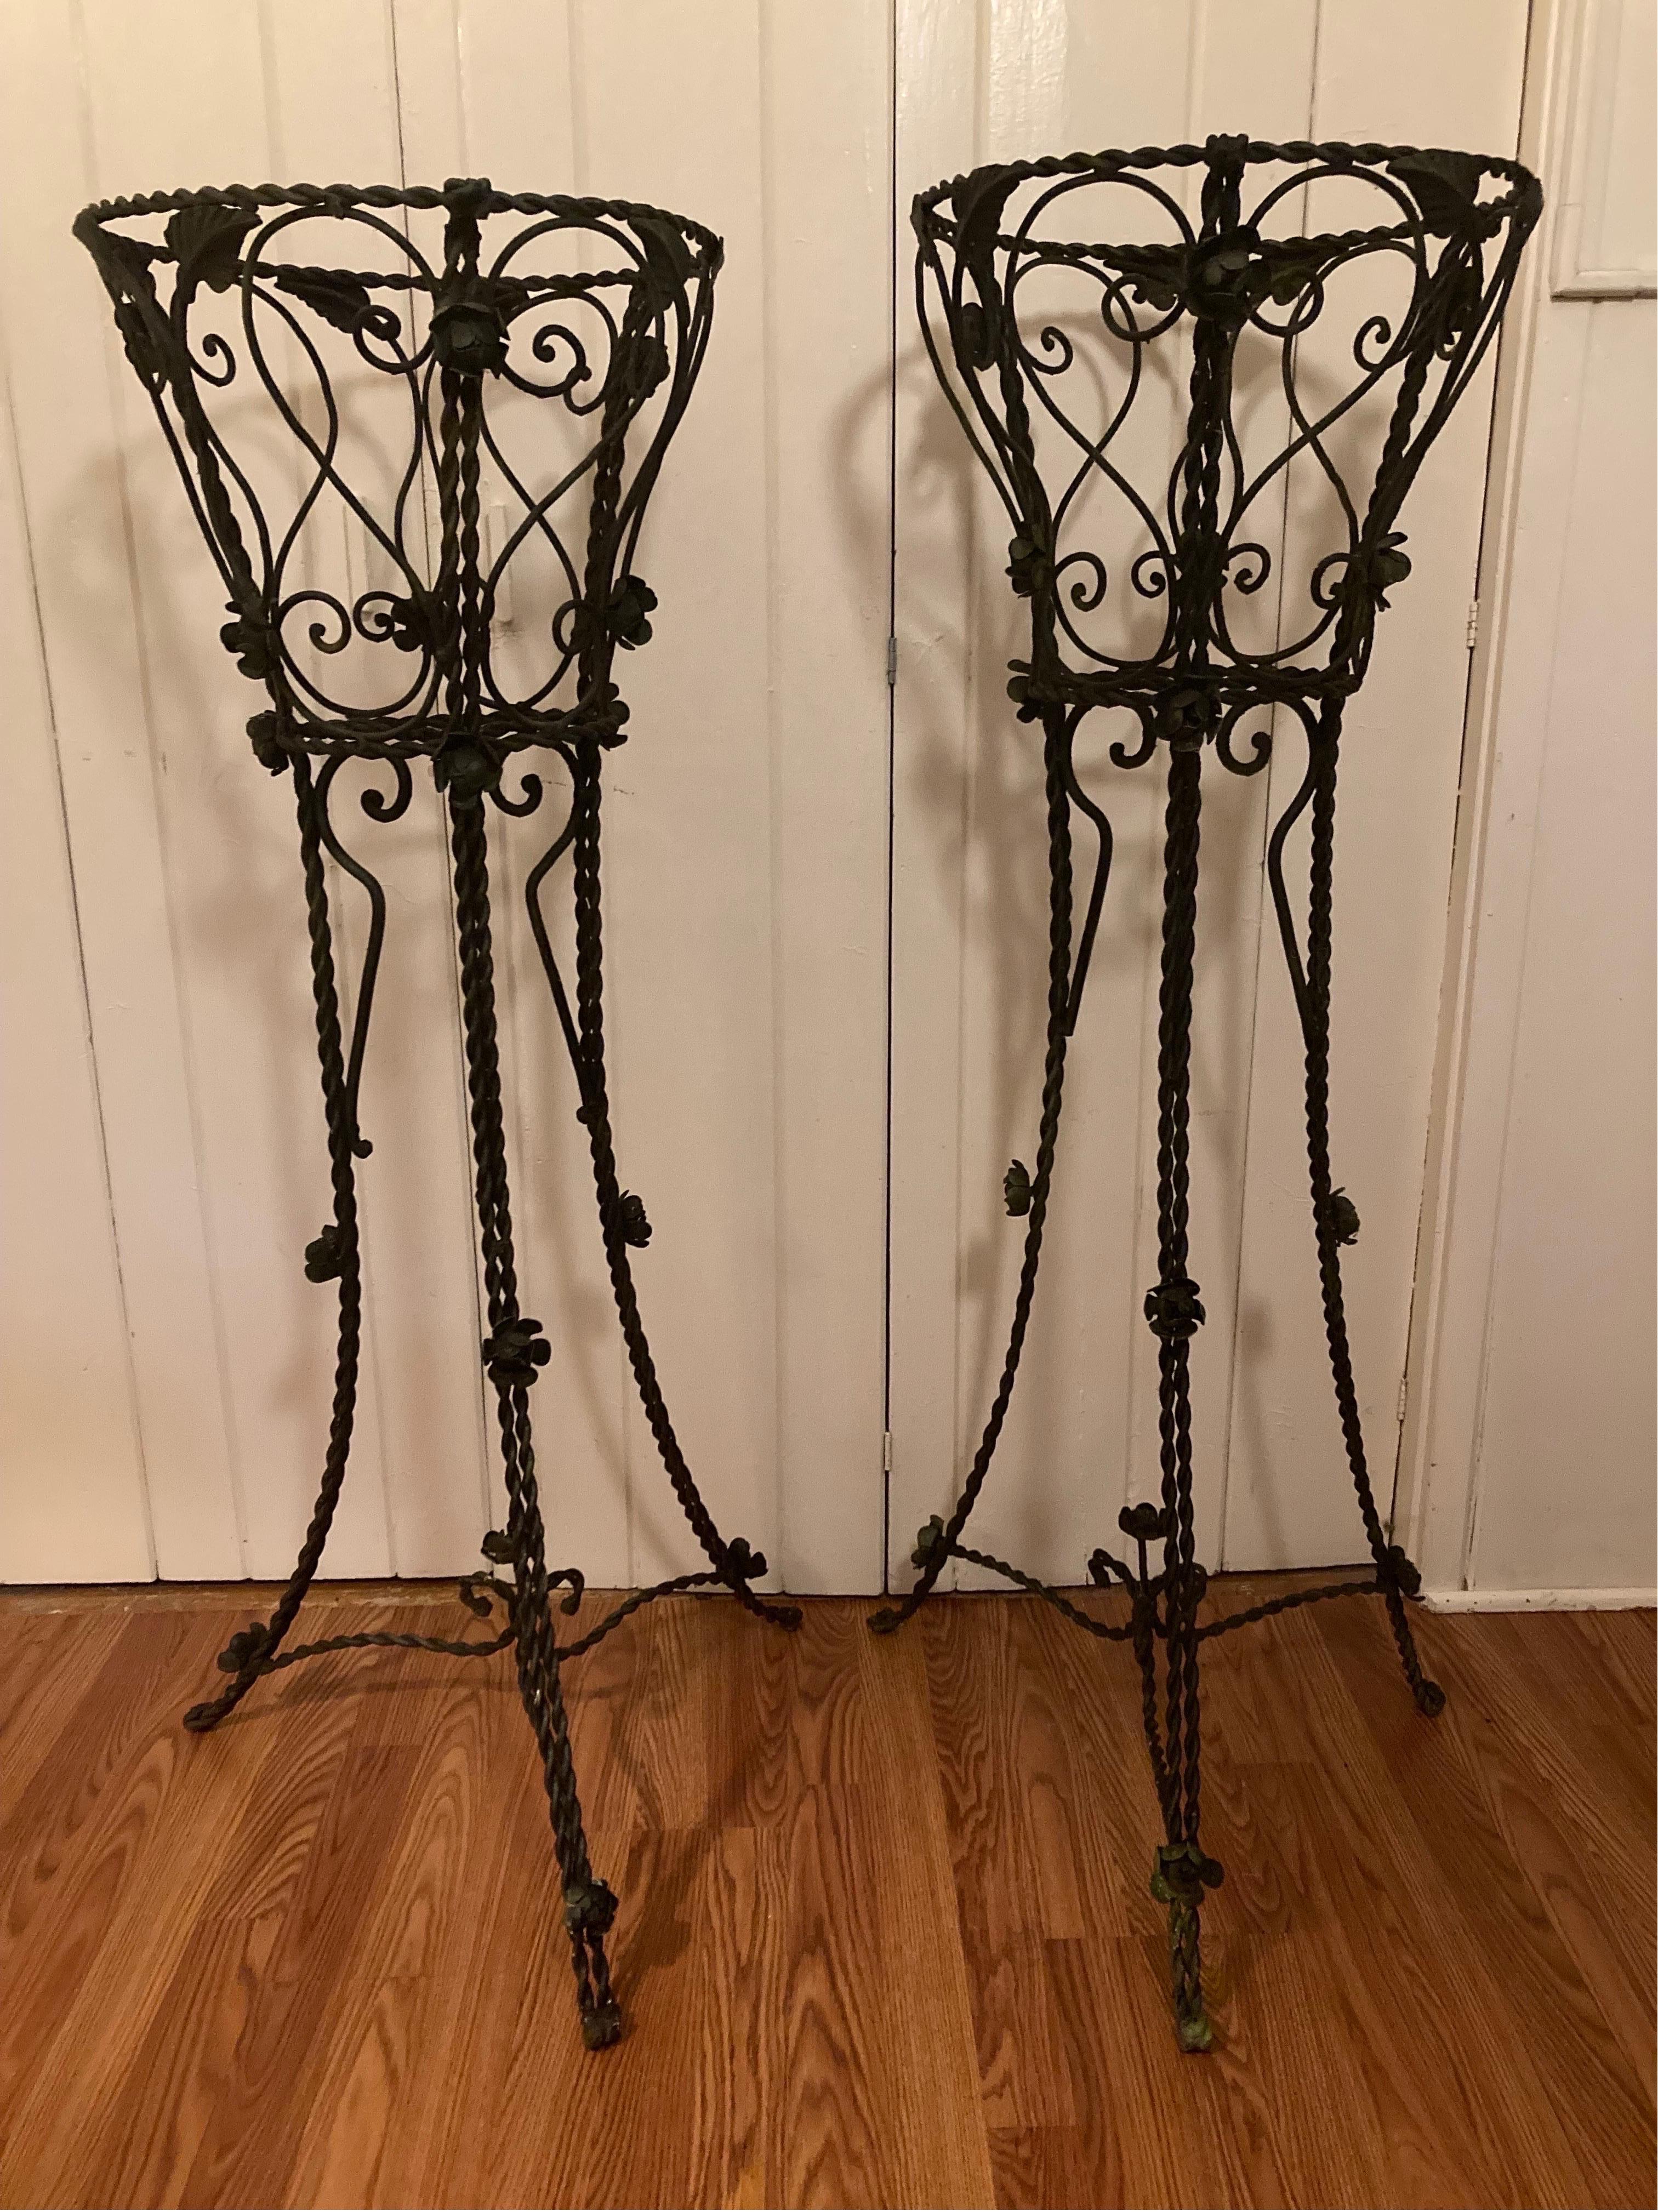 older pair, handmade very large 
50 inches tall with a 16 inch wide basket. rose adornments, subtle green hues throughout… these are great statements pieces, one is about 1 inch shorter than the other
16ʺW × 16ʺD × 50ʺH
